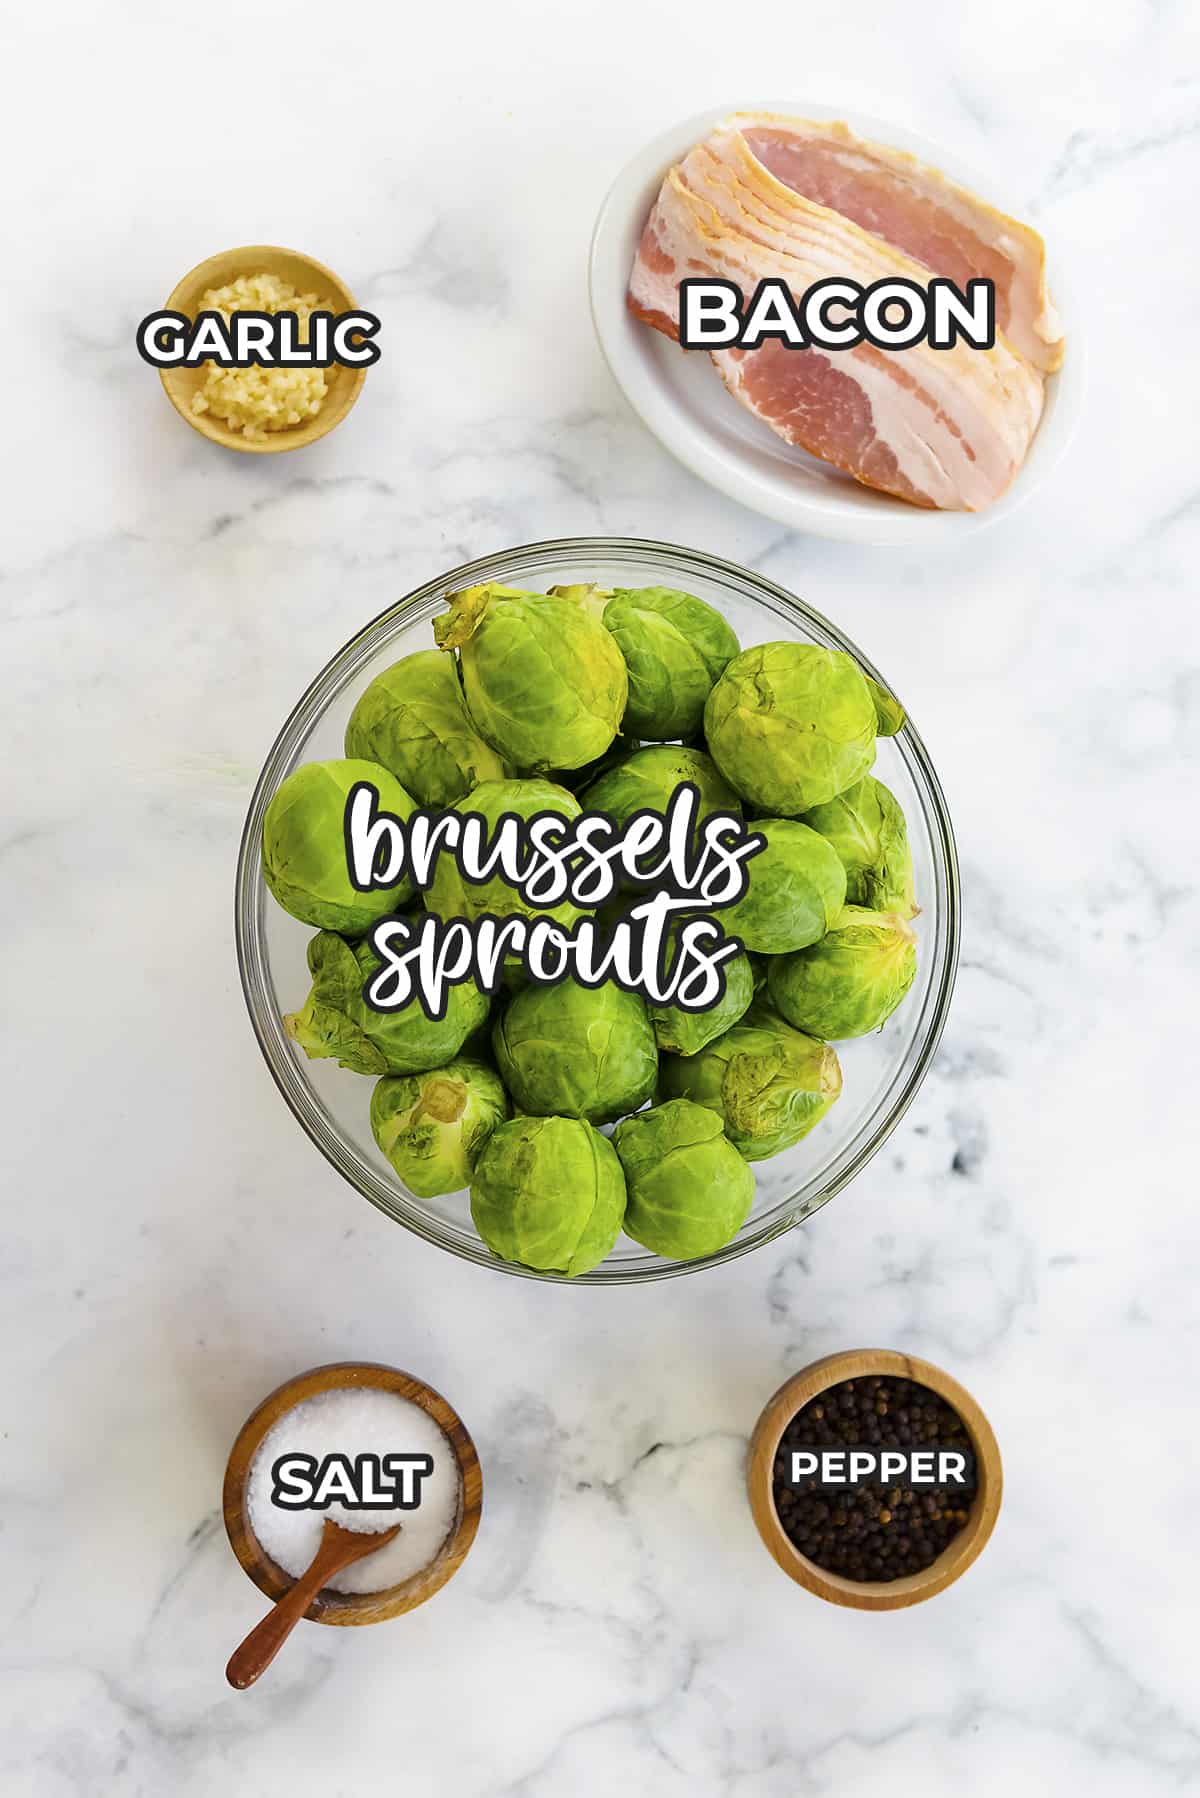 Ingredients for brussels sprouts with bacon.